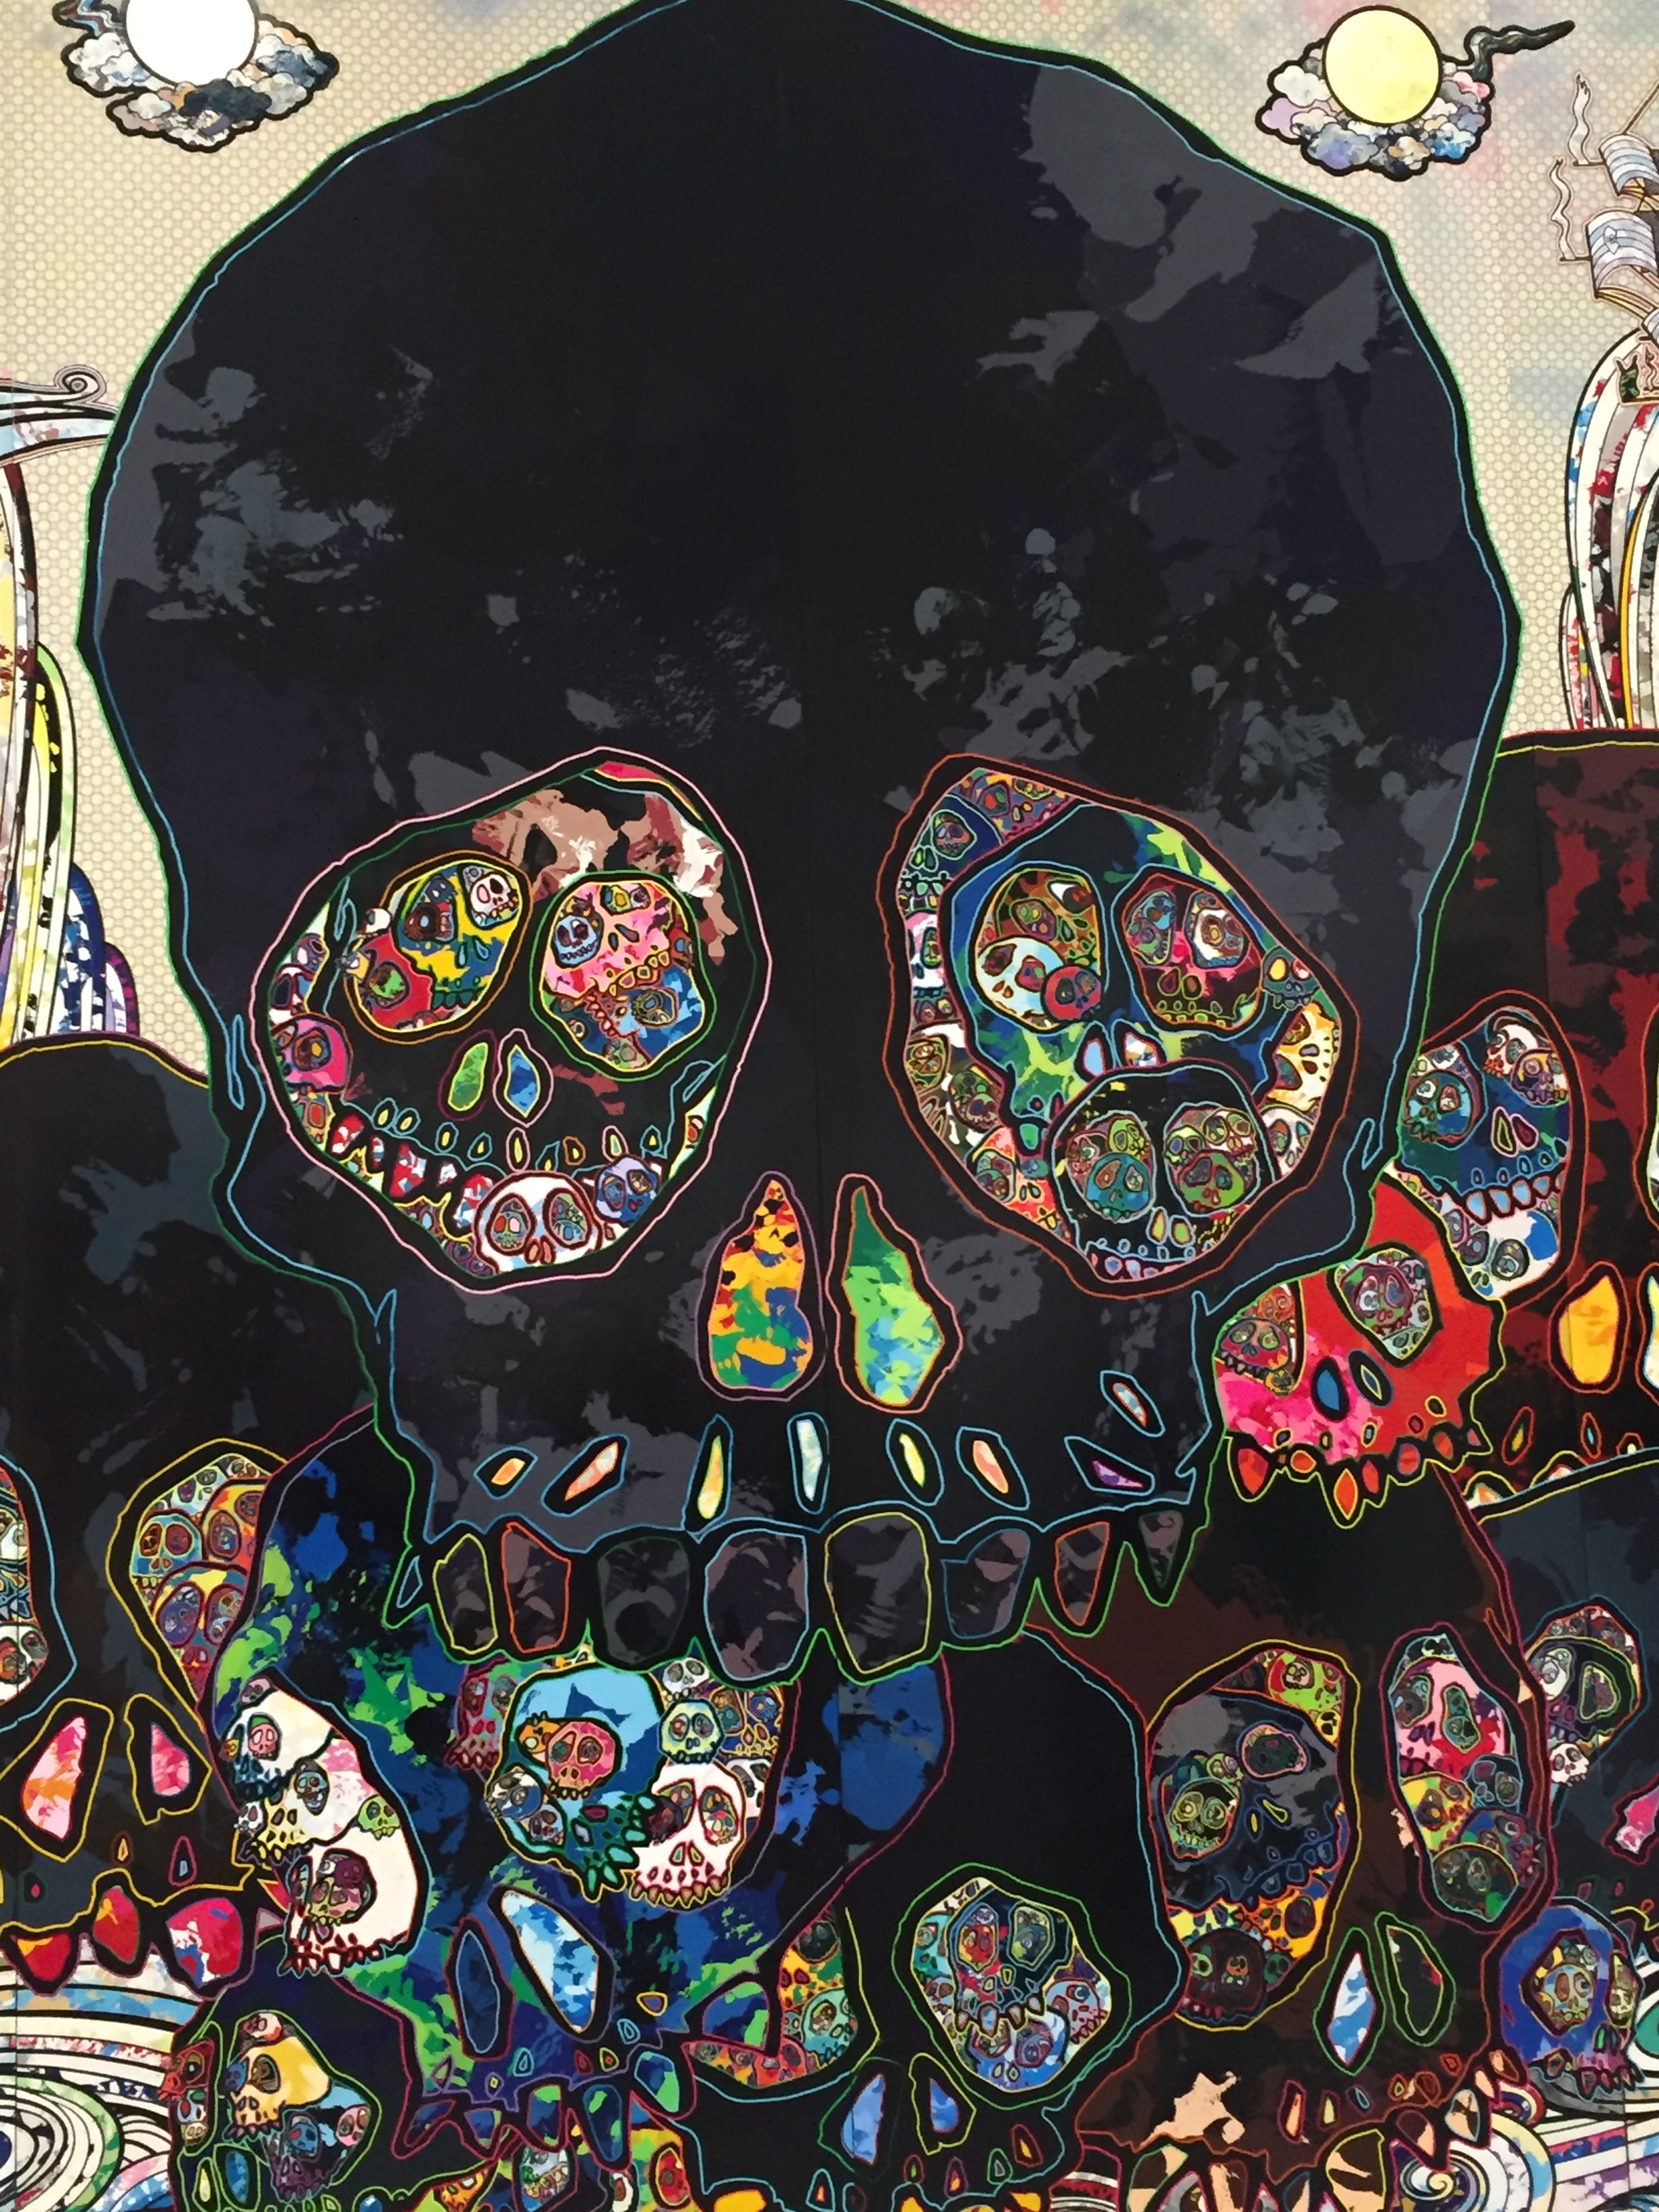 142116 download wallpaper skull, art, multicolored, motley, skulls screensavers and pictures for free